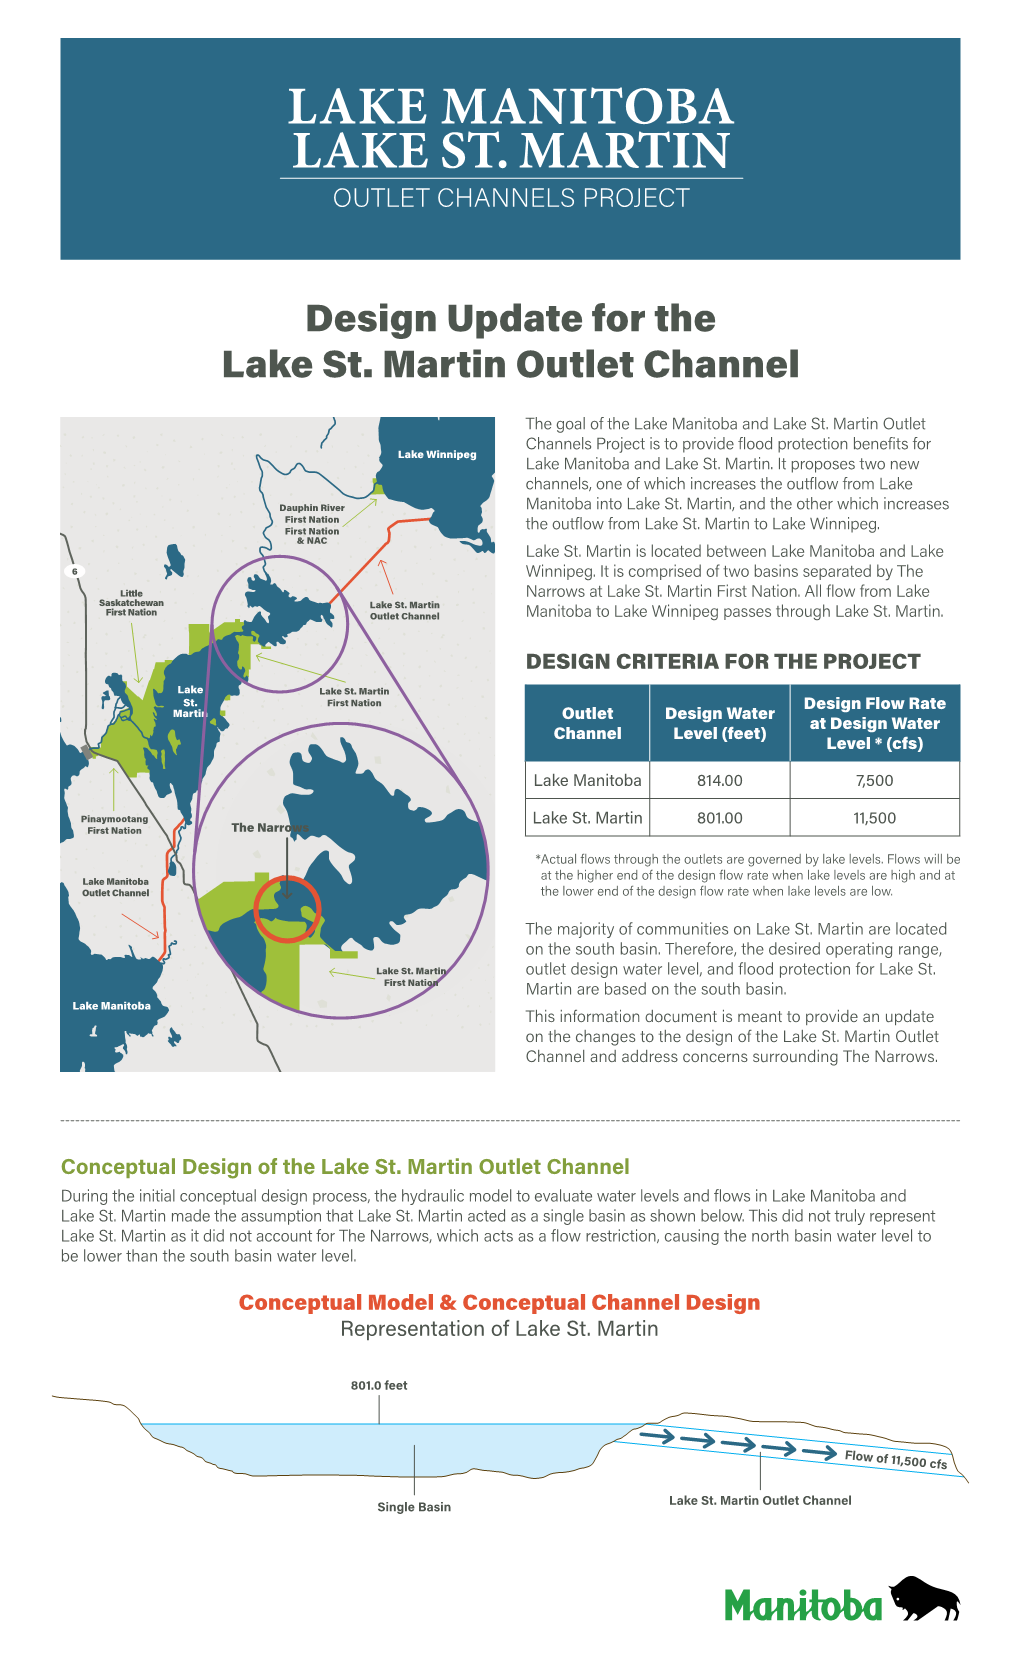 The Narrows & Lake St. Martin Outlet Channel Design Update